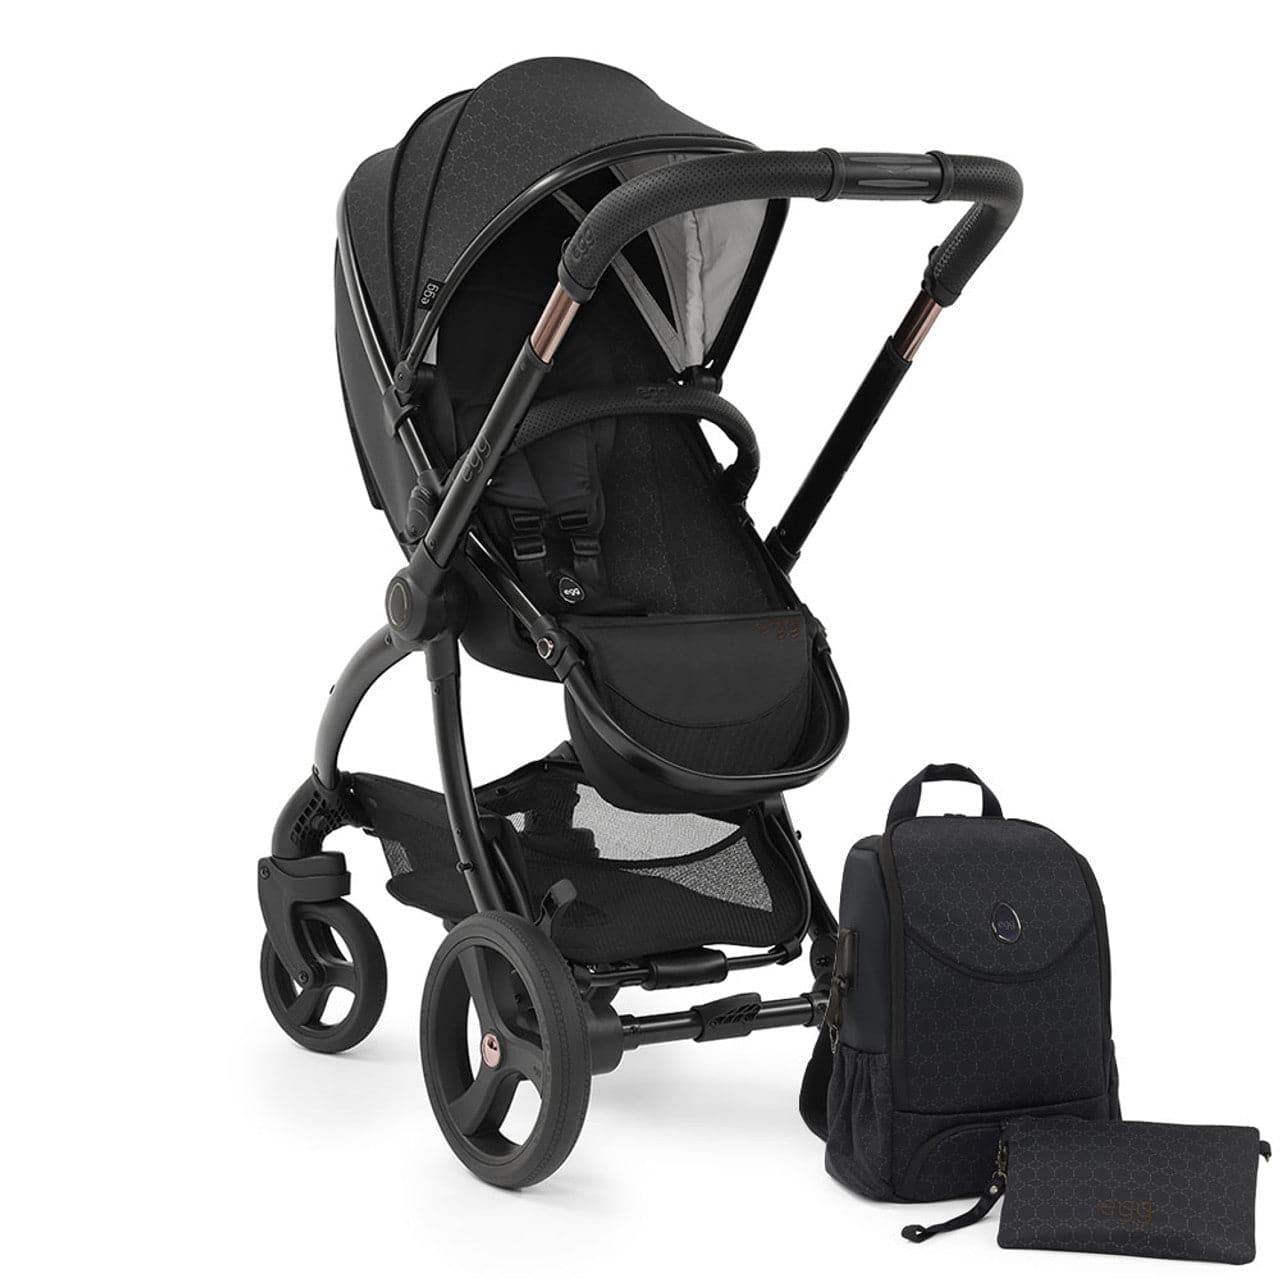 Egg® 2 Pushchair Special Edition With Seat Liner - Black Geo - For Your Little One